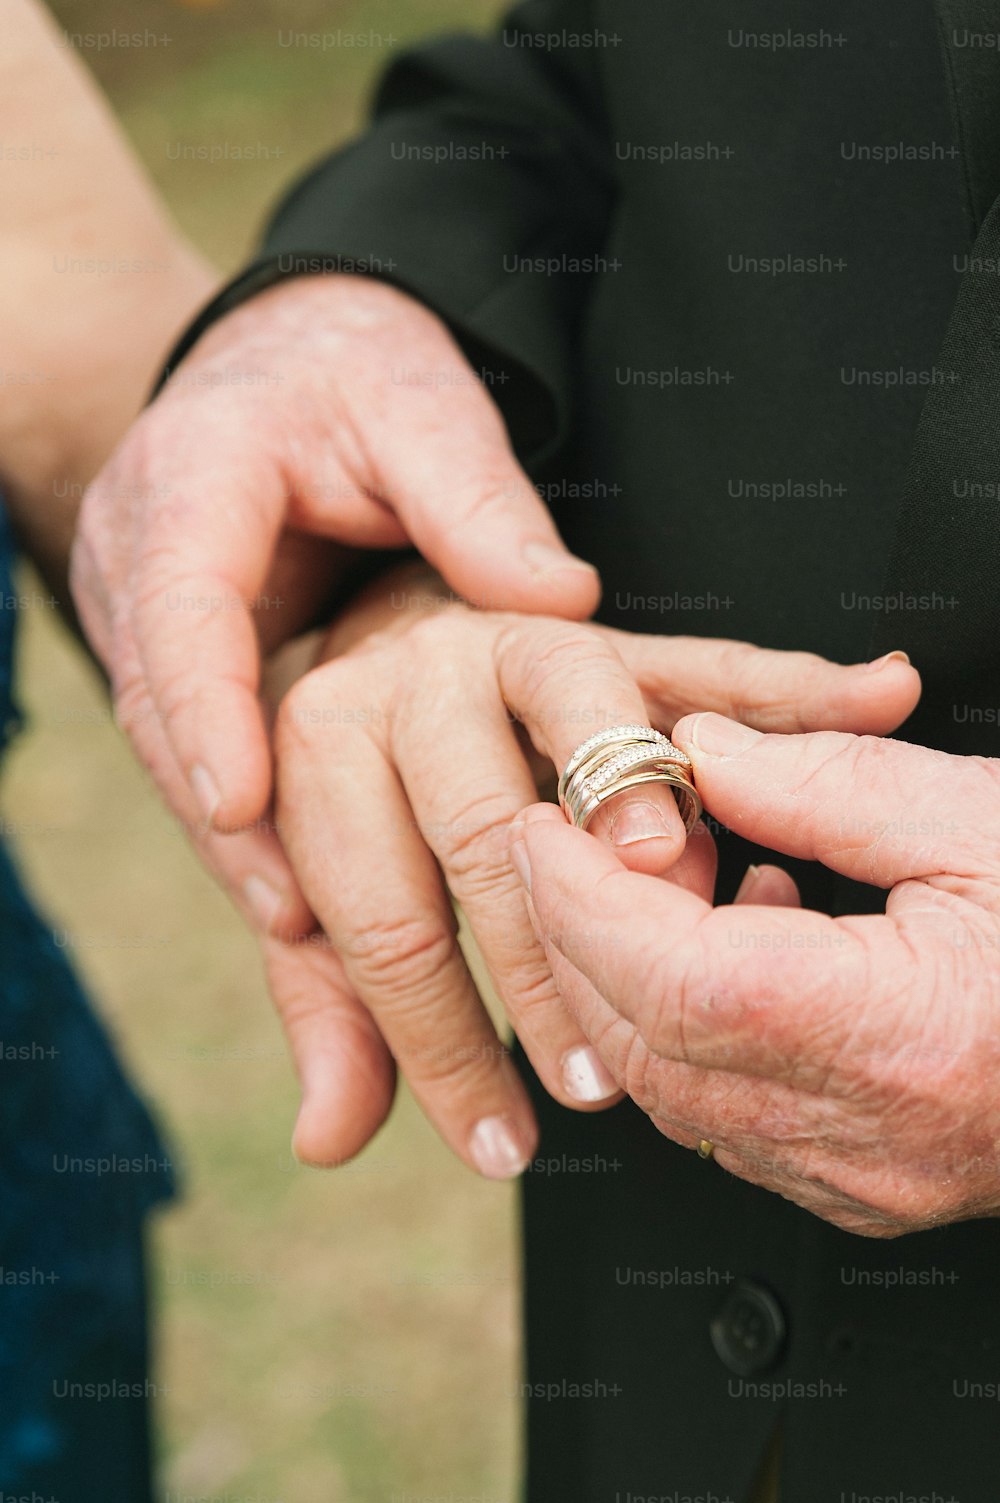 a close up of a person holding a wedding ring